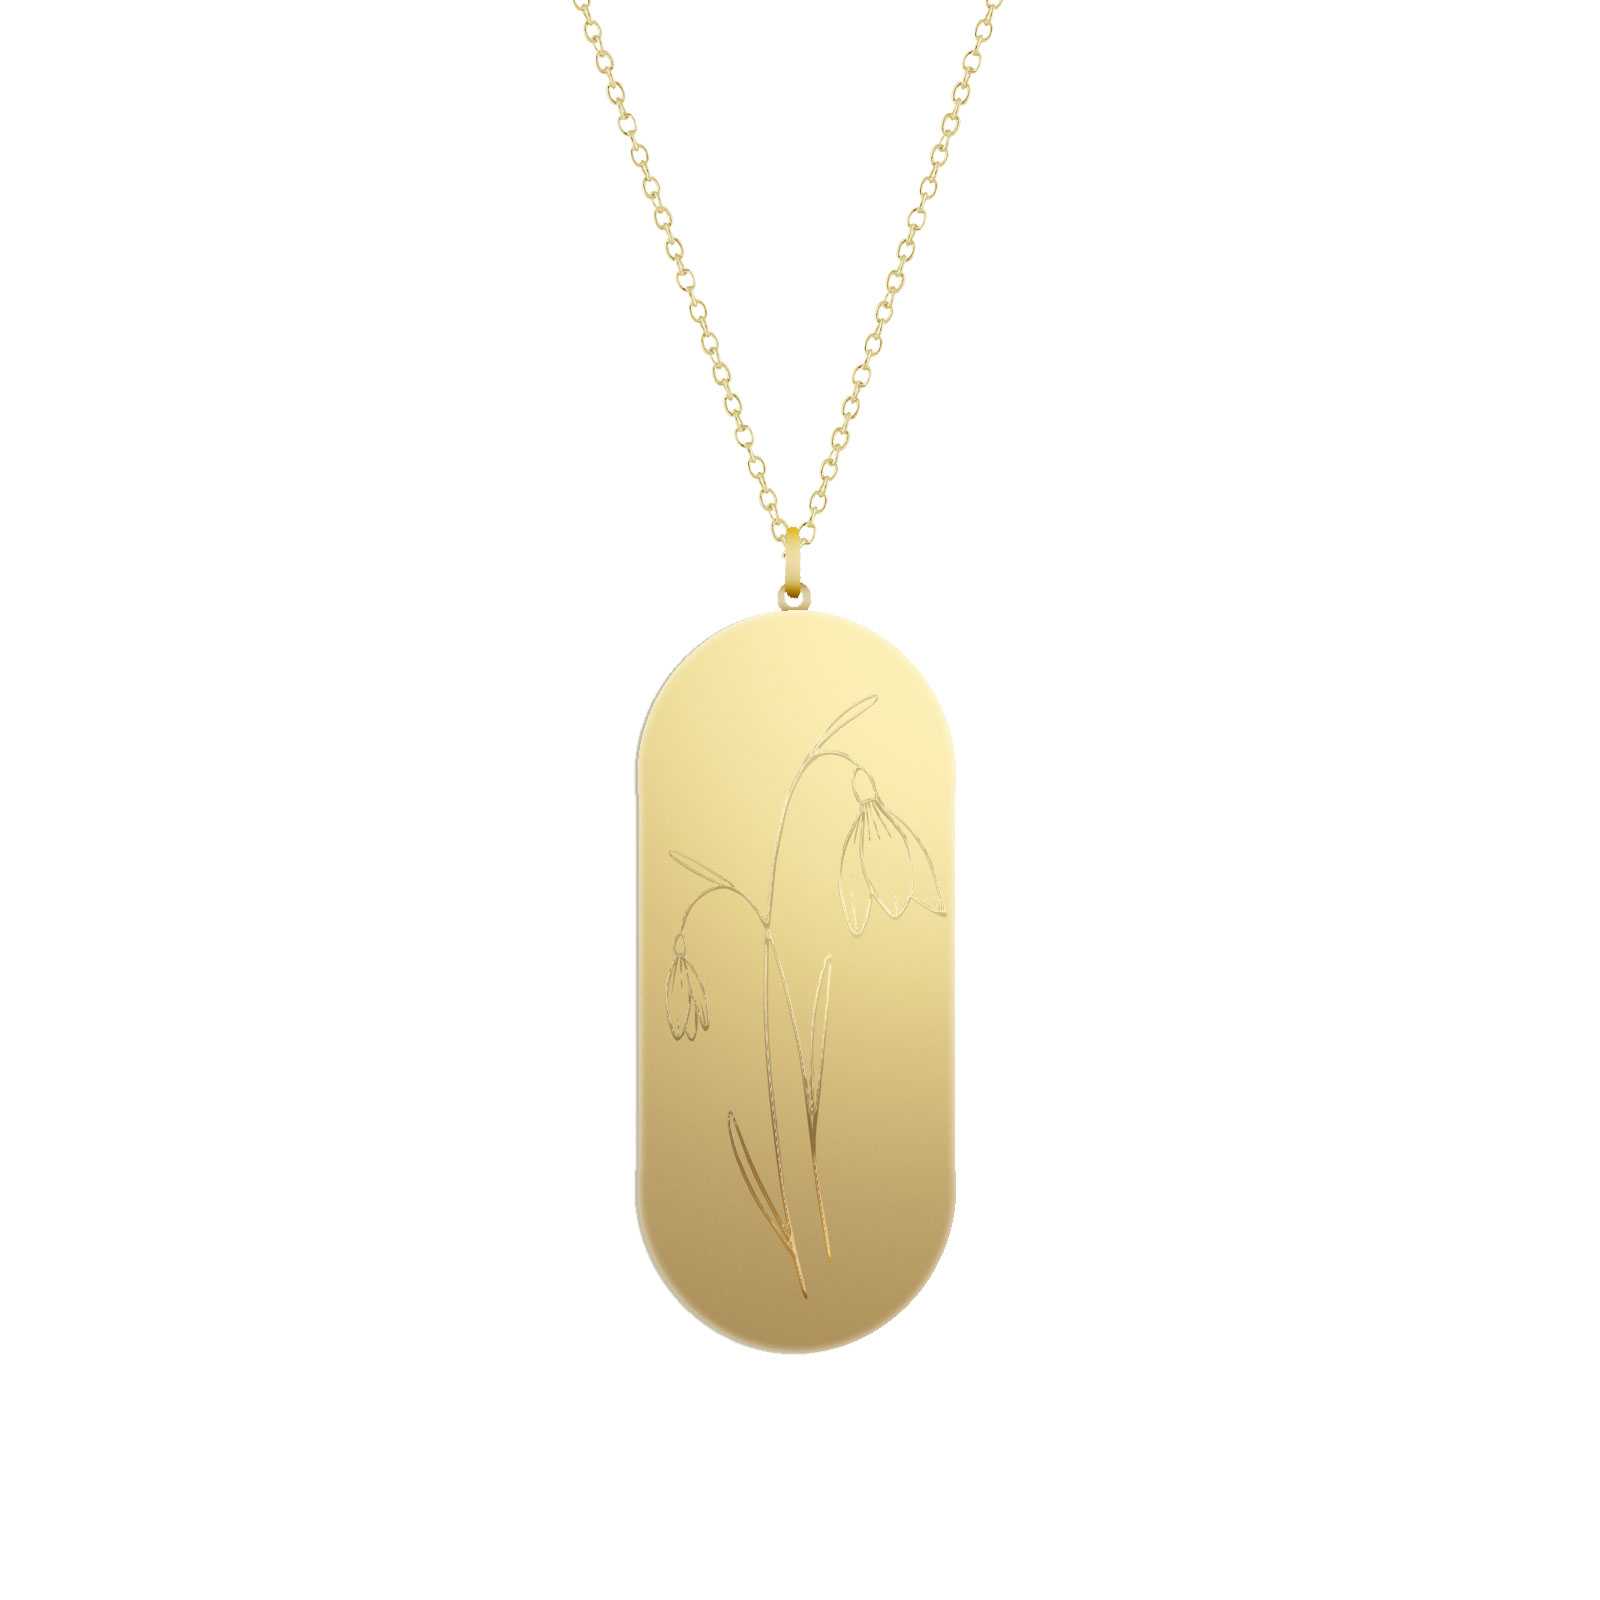 Birth Flower Necklace - Engraved Silver and Gold Vermeil| Mali's Engraved  Birth flower necklace available in sterling silver an